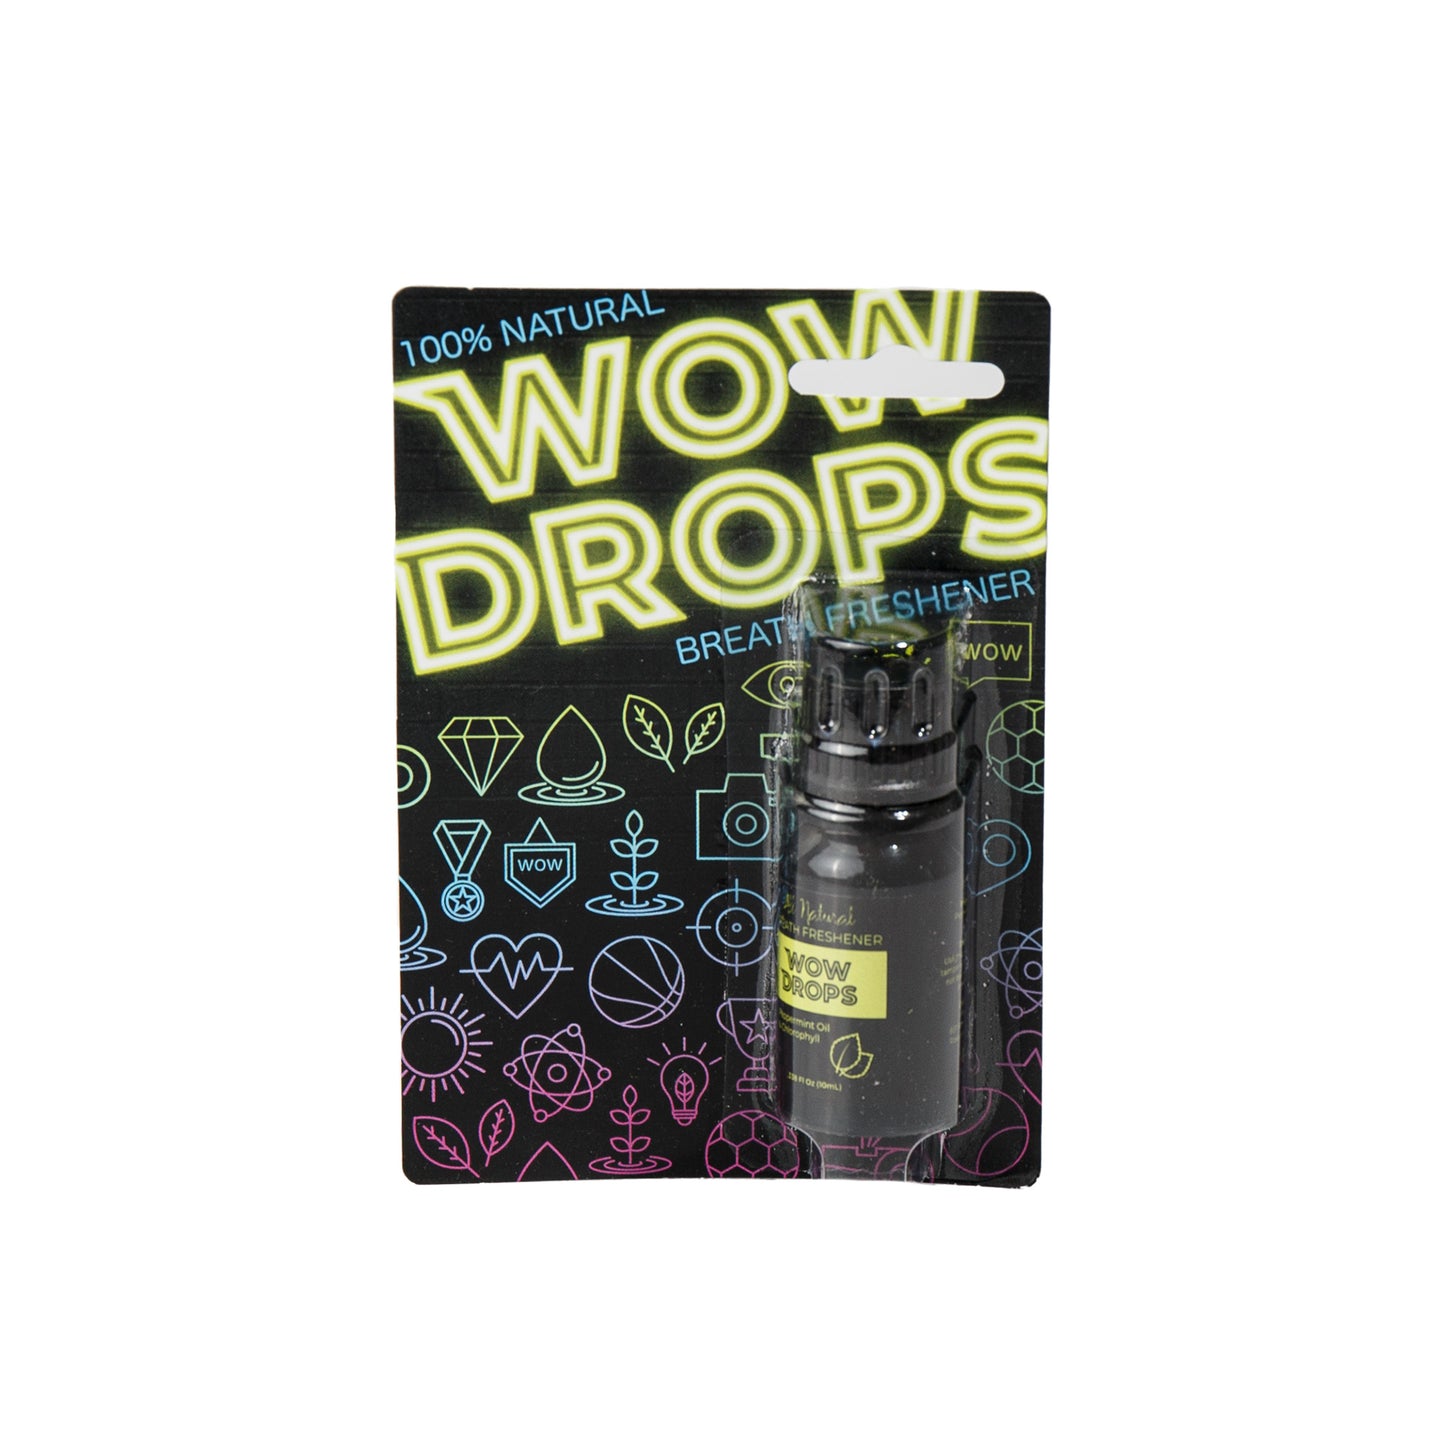 Primary image of Wow Drops Breath FReshener